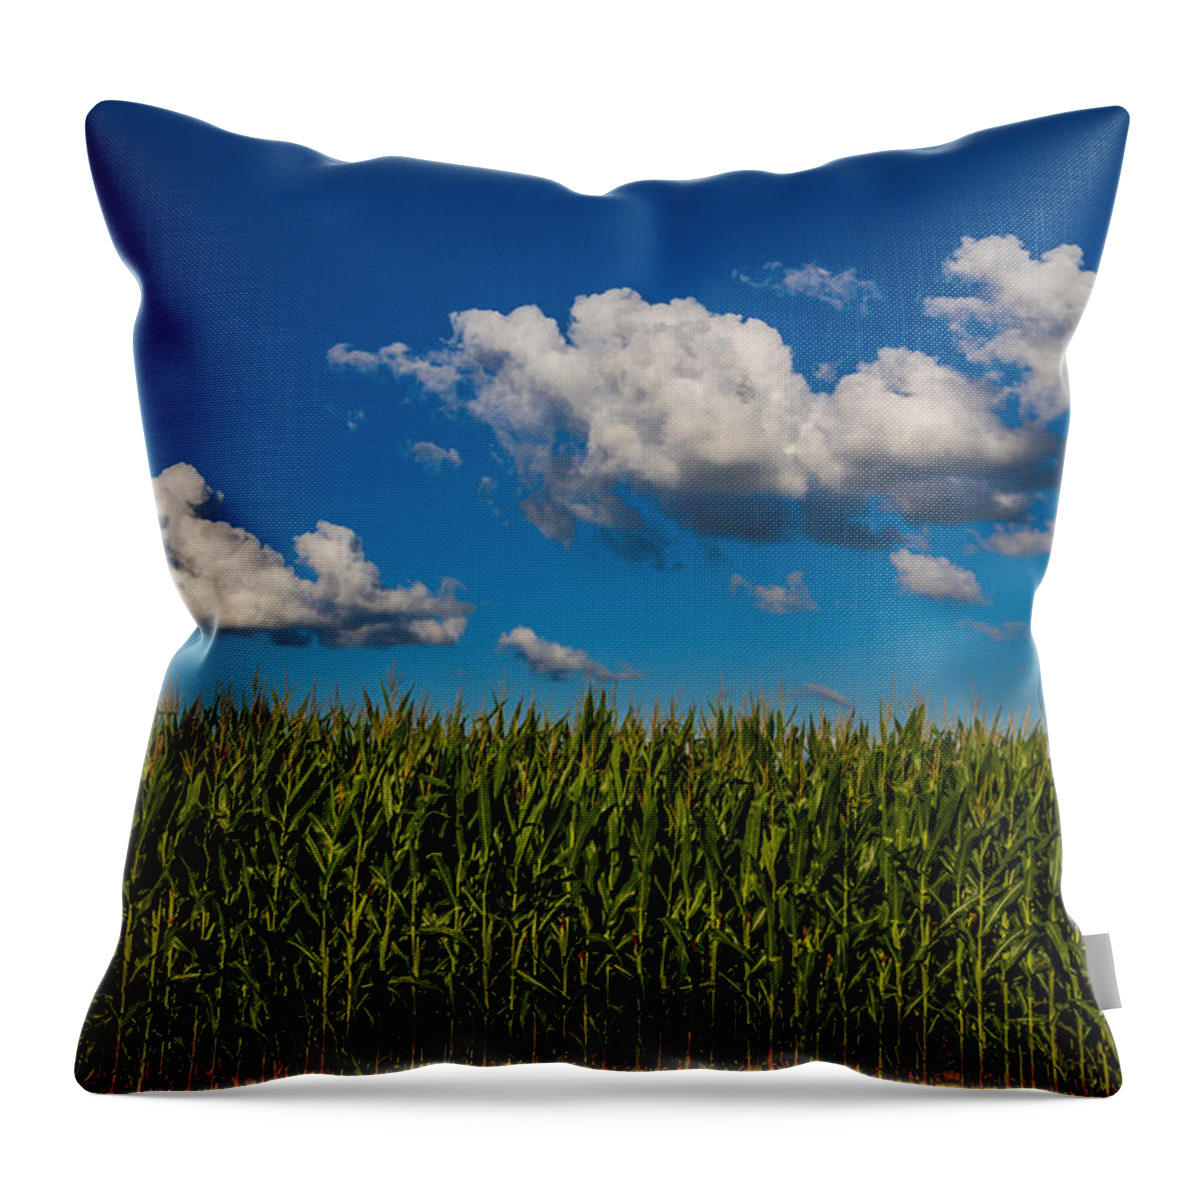 Indiana Throw Pillow featuring the photograph Corn Field by Ron Pate